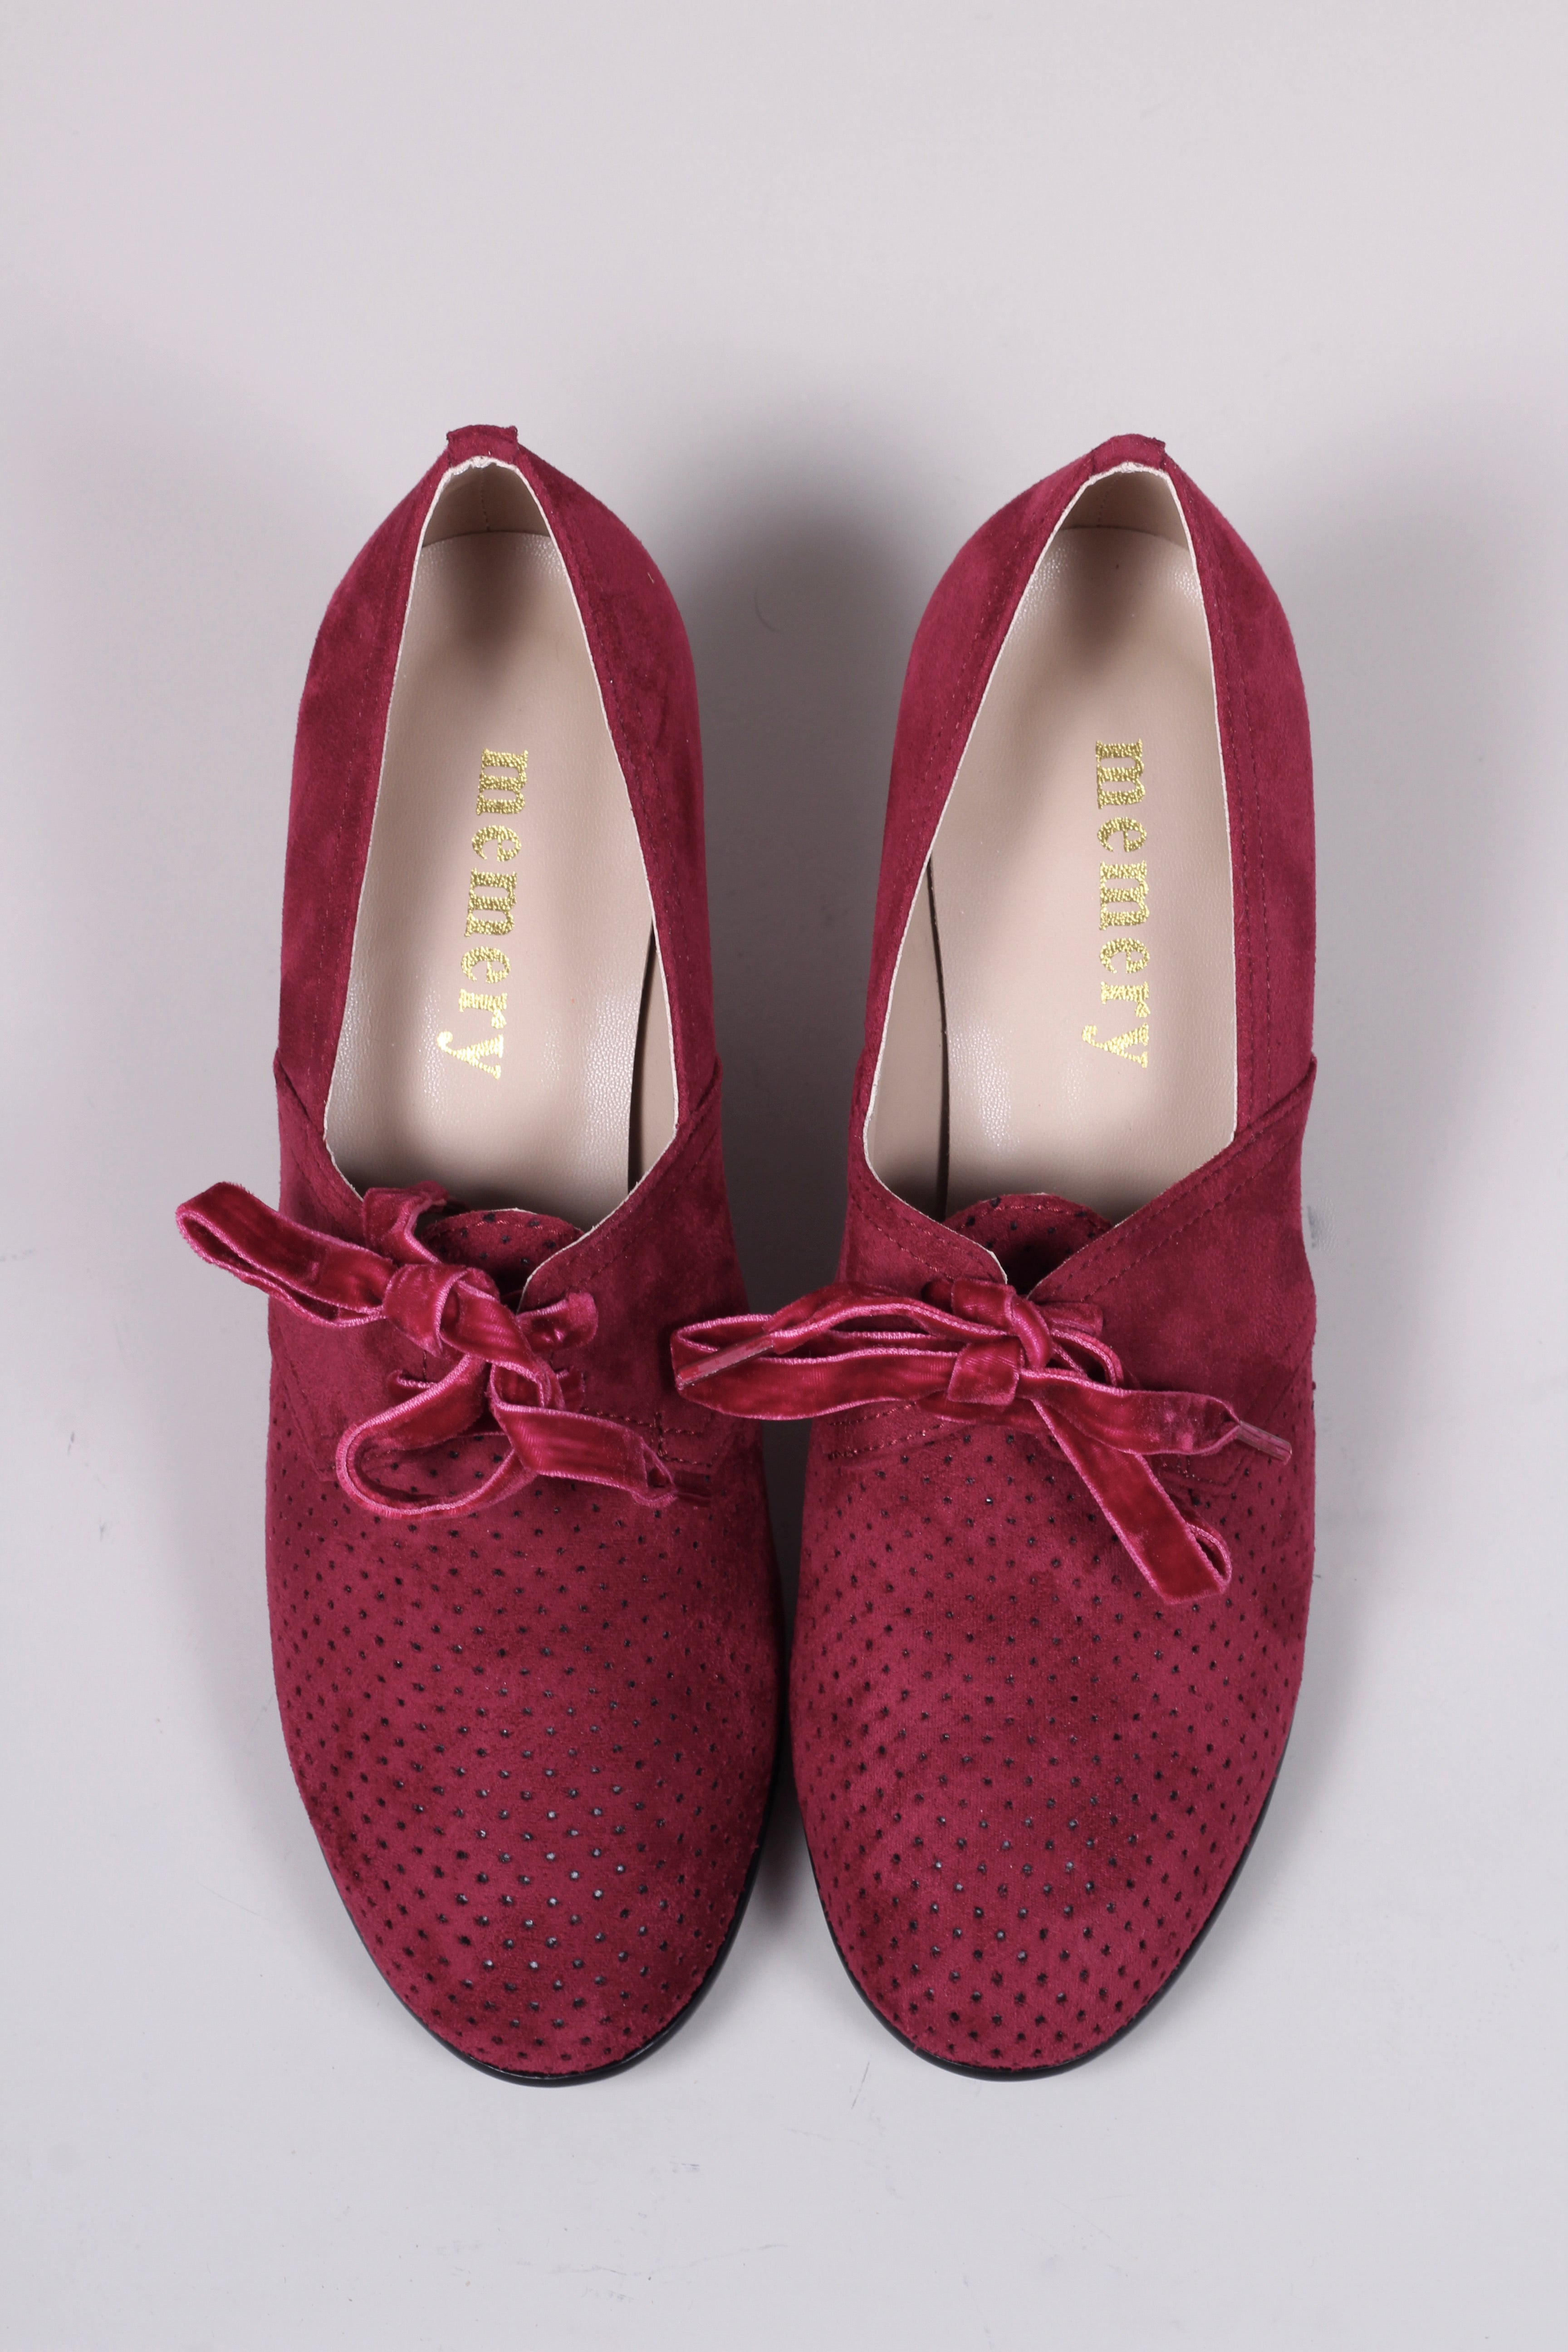 VEGAN shoes - 40s vintage style pumps  with shoe lace - Burgundy Red - Esther